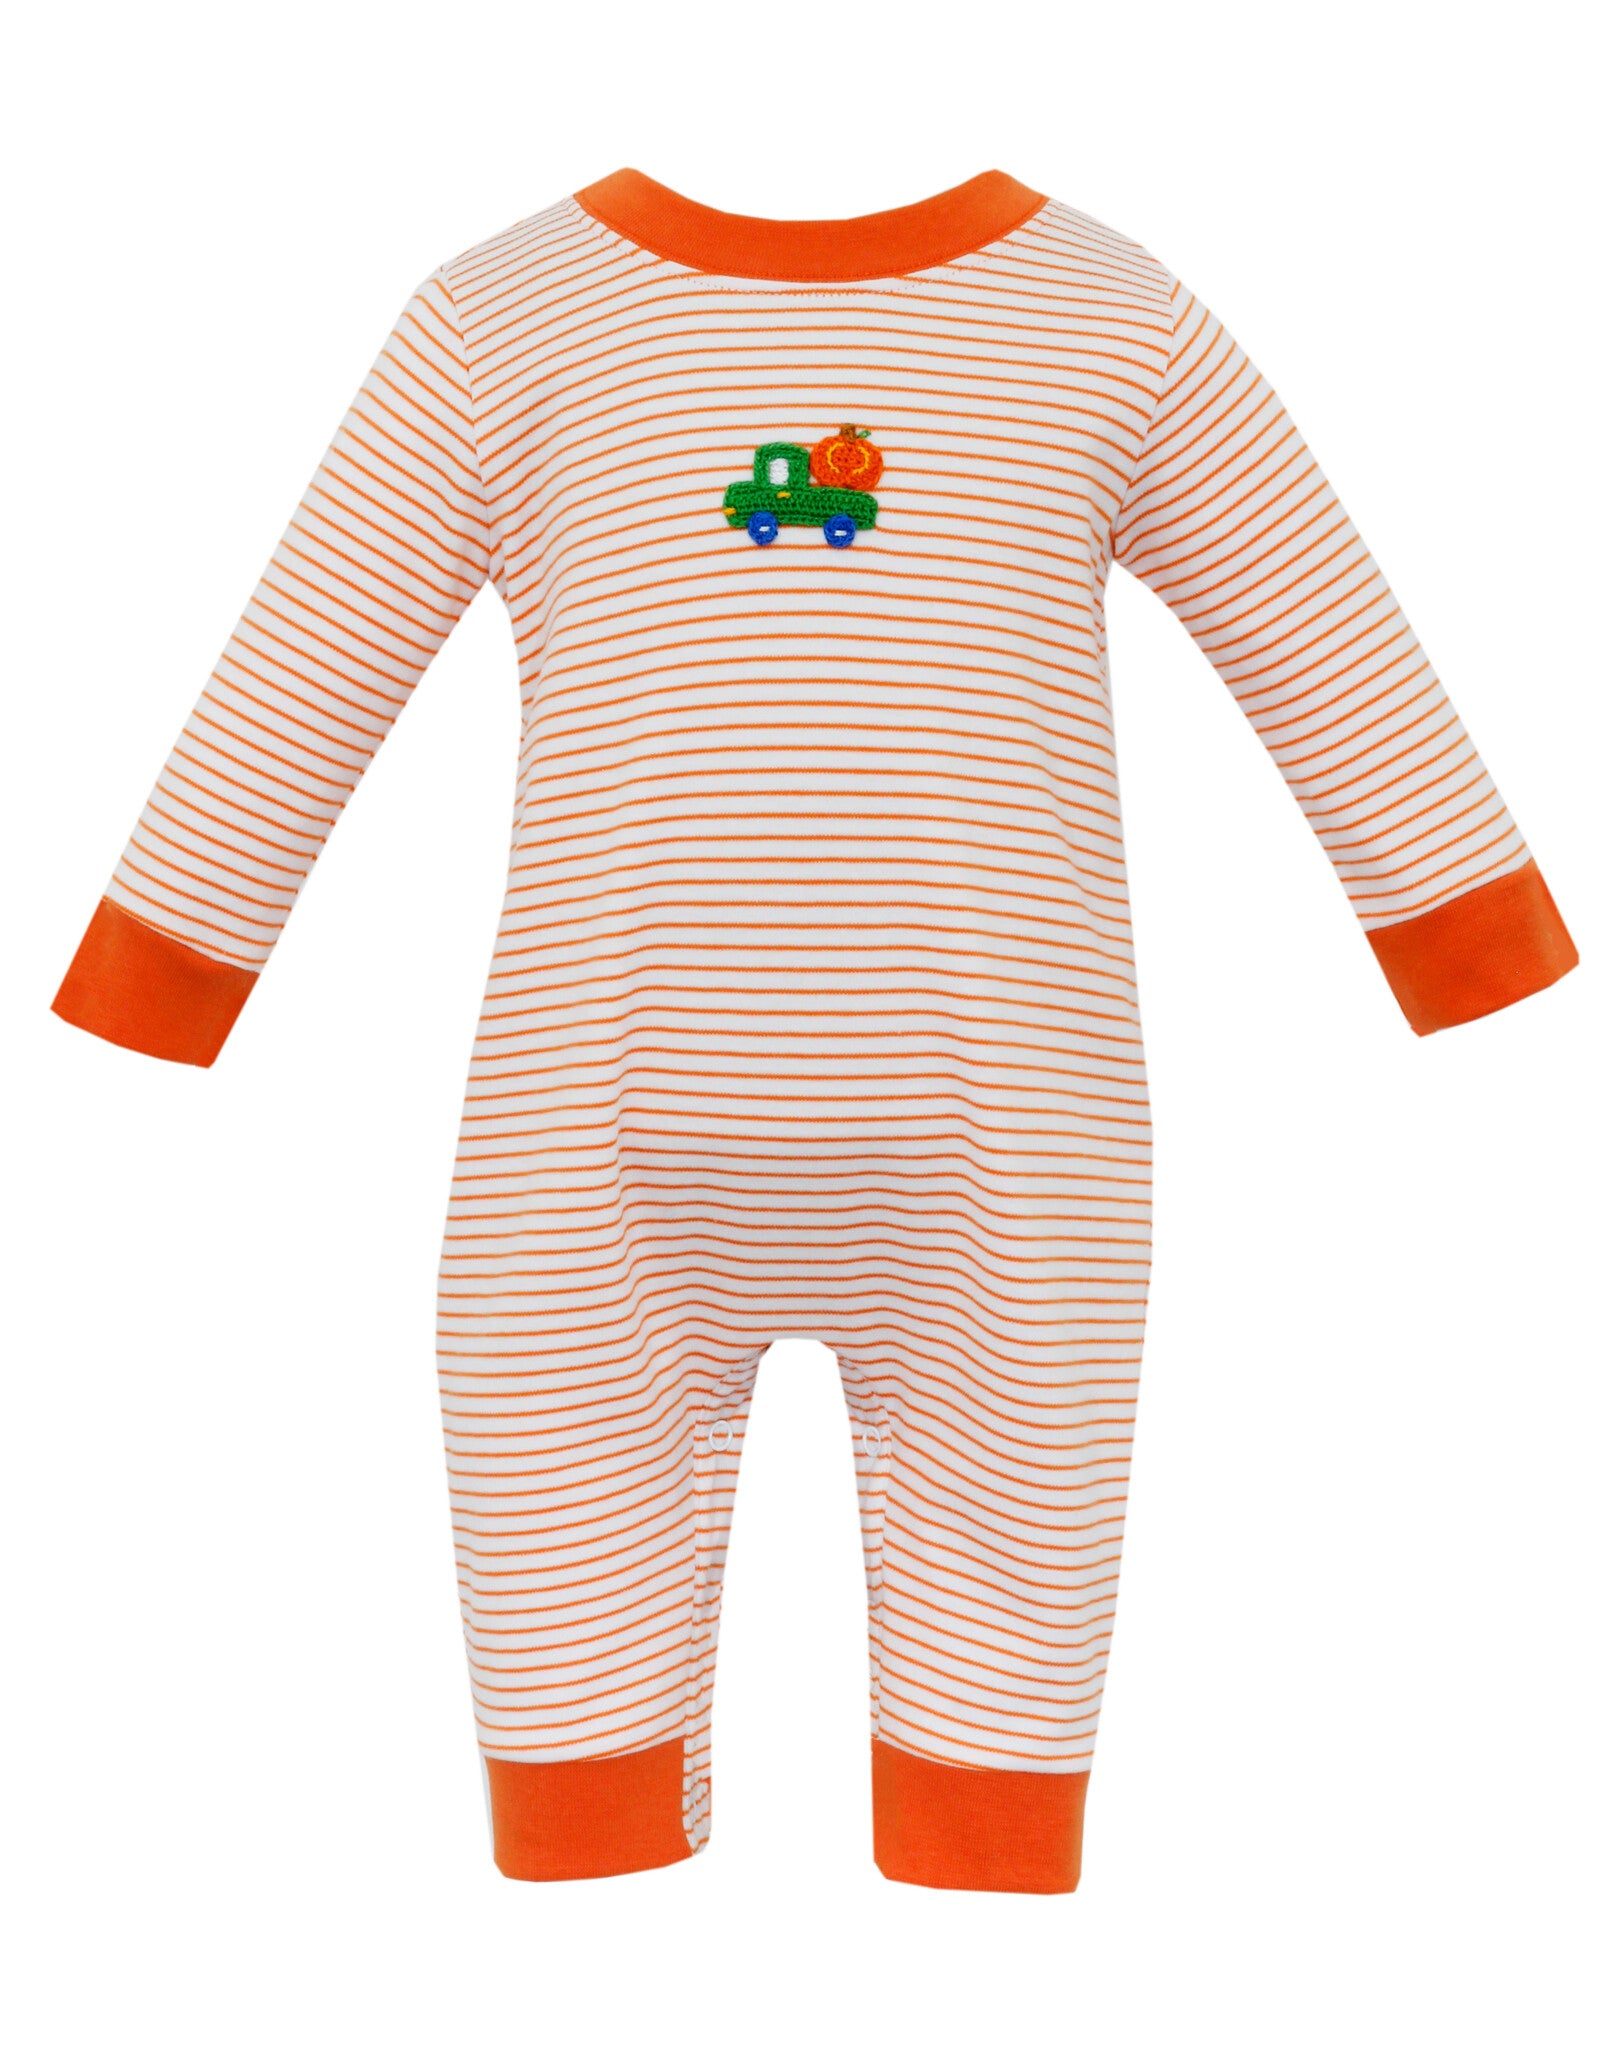 Orange and White Stripe Long Sleeve Romper with Hand Embroidered Pumpkin Truck